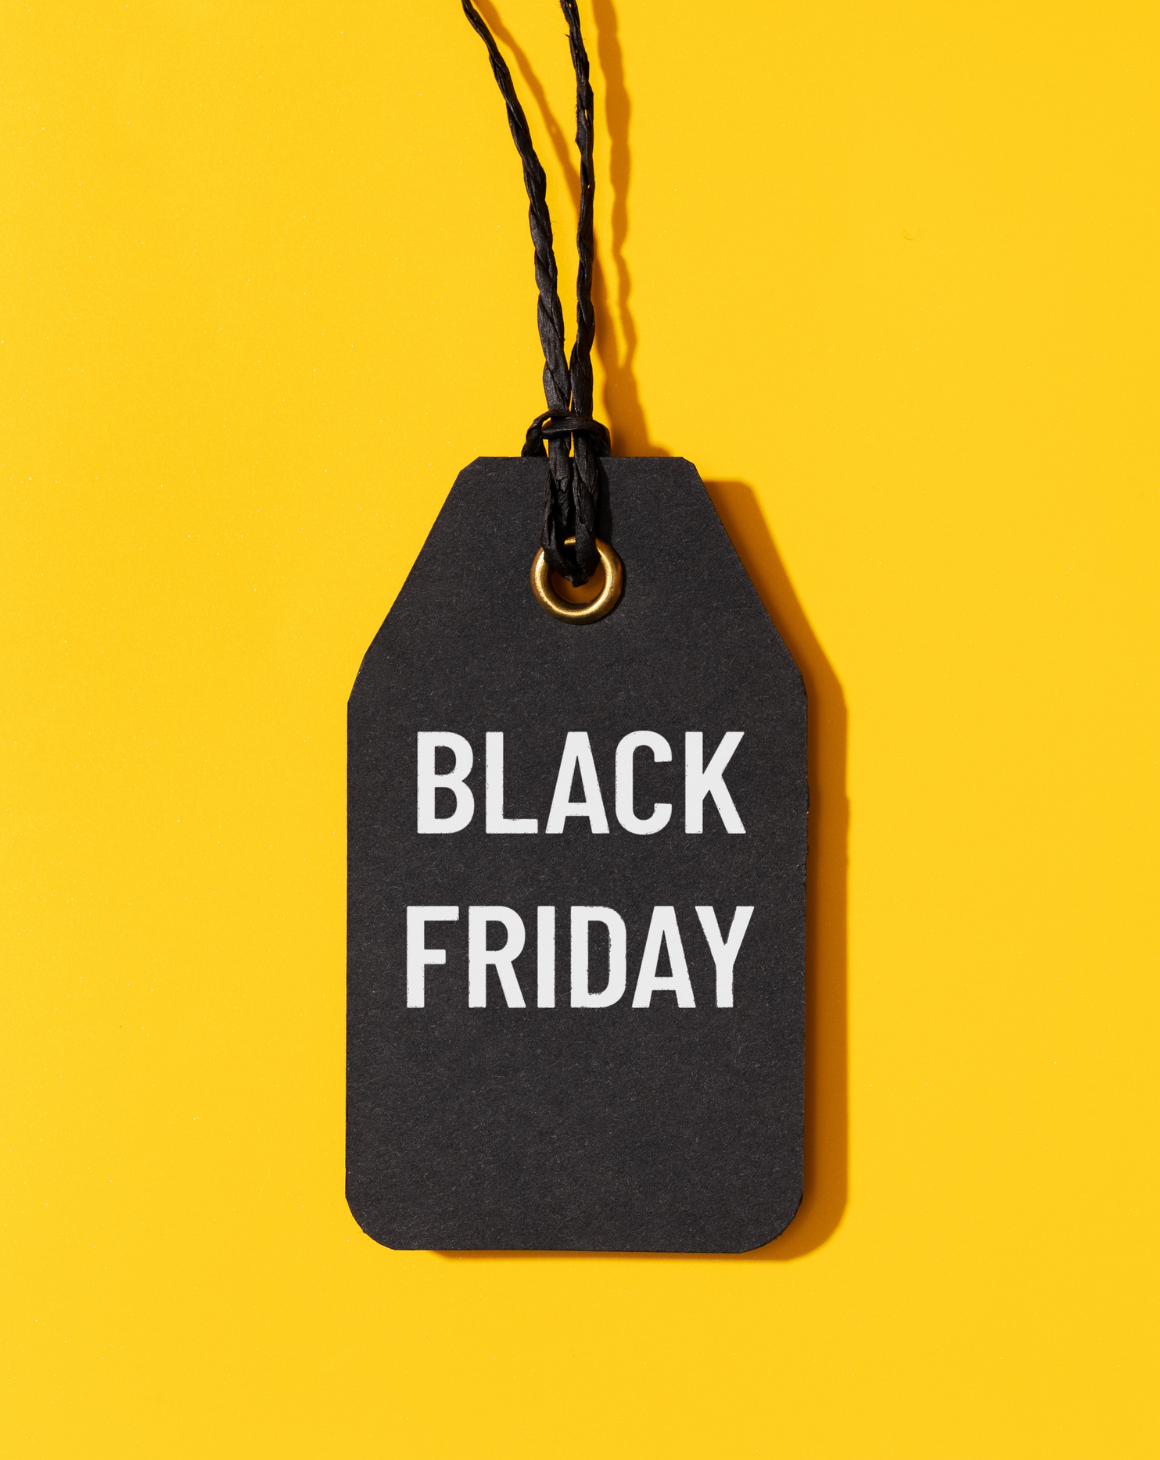 a Black Friday tag on yellow background